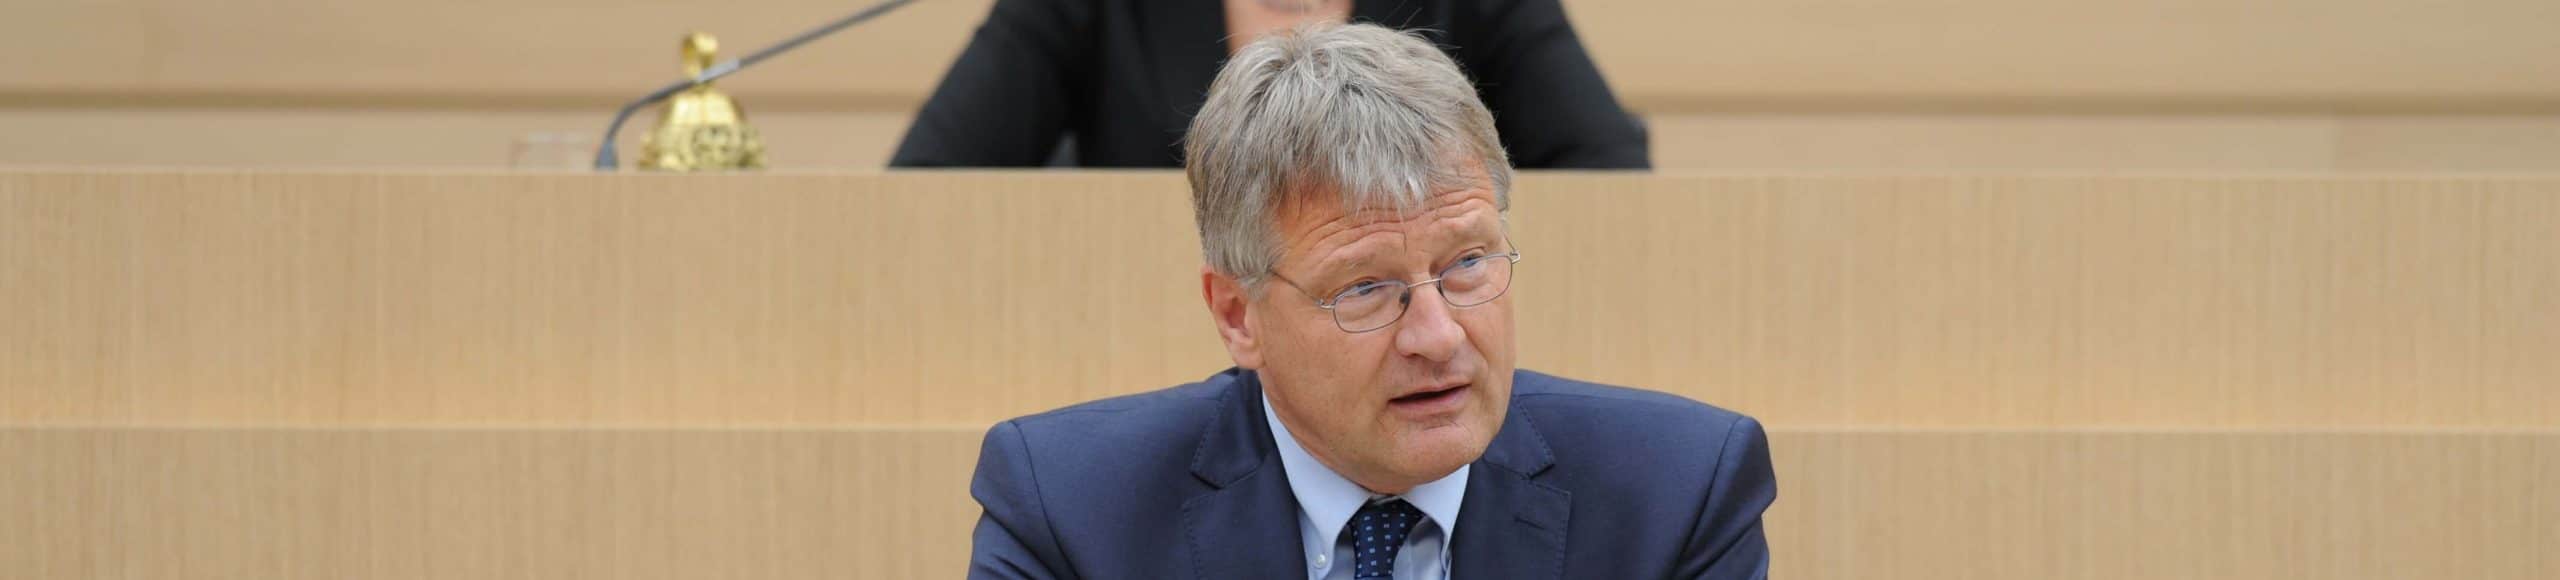 AfD Meuthen MdL LTBW